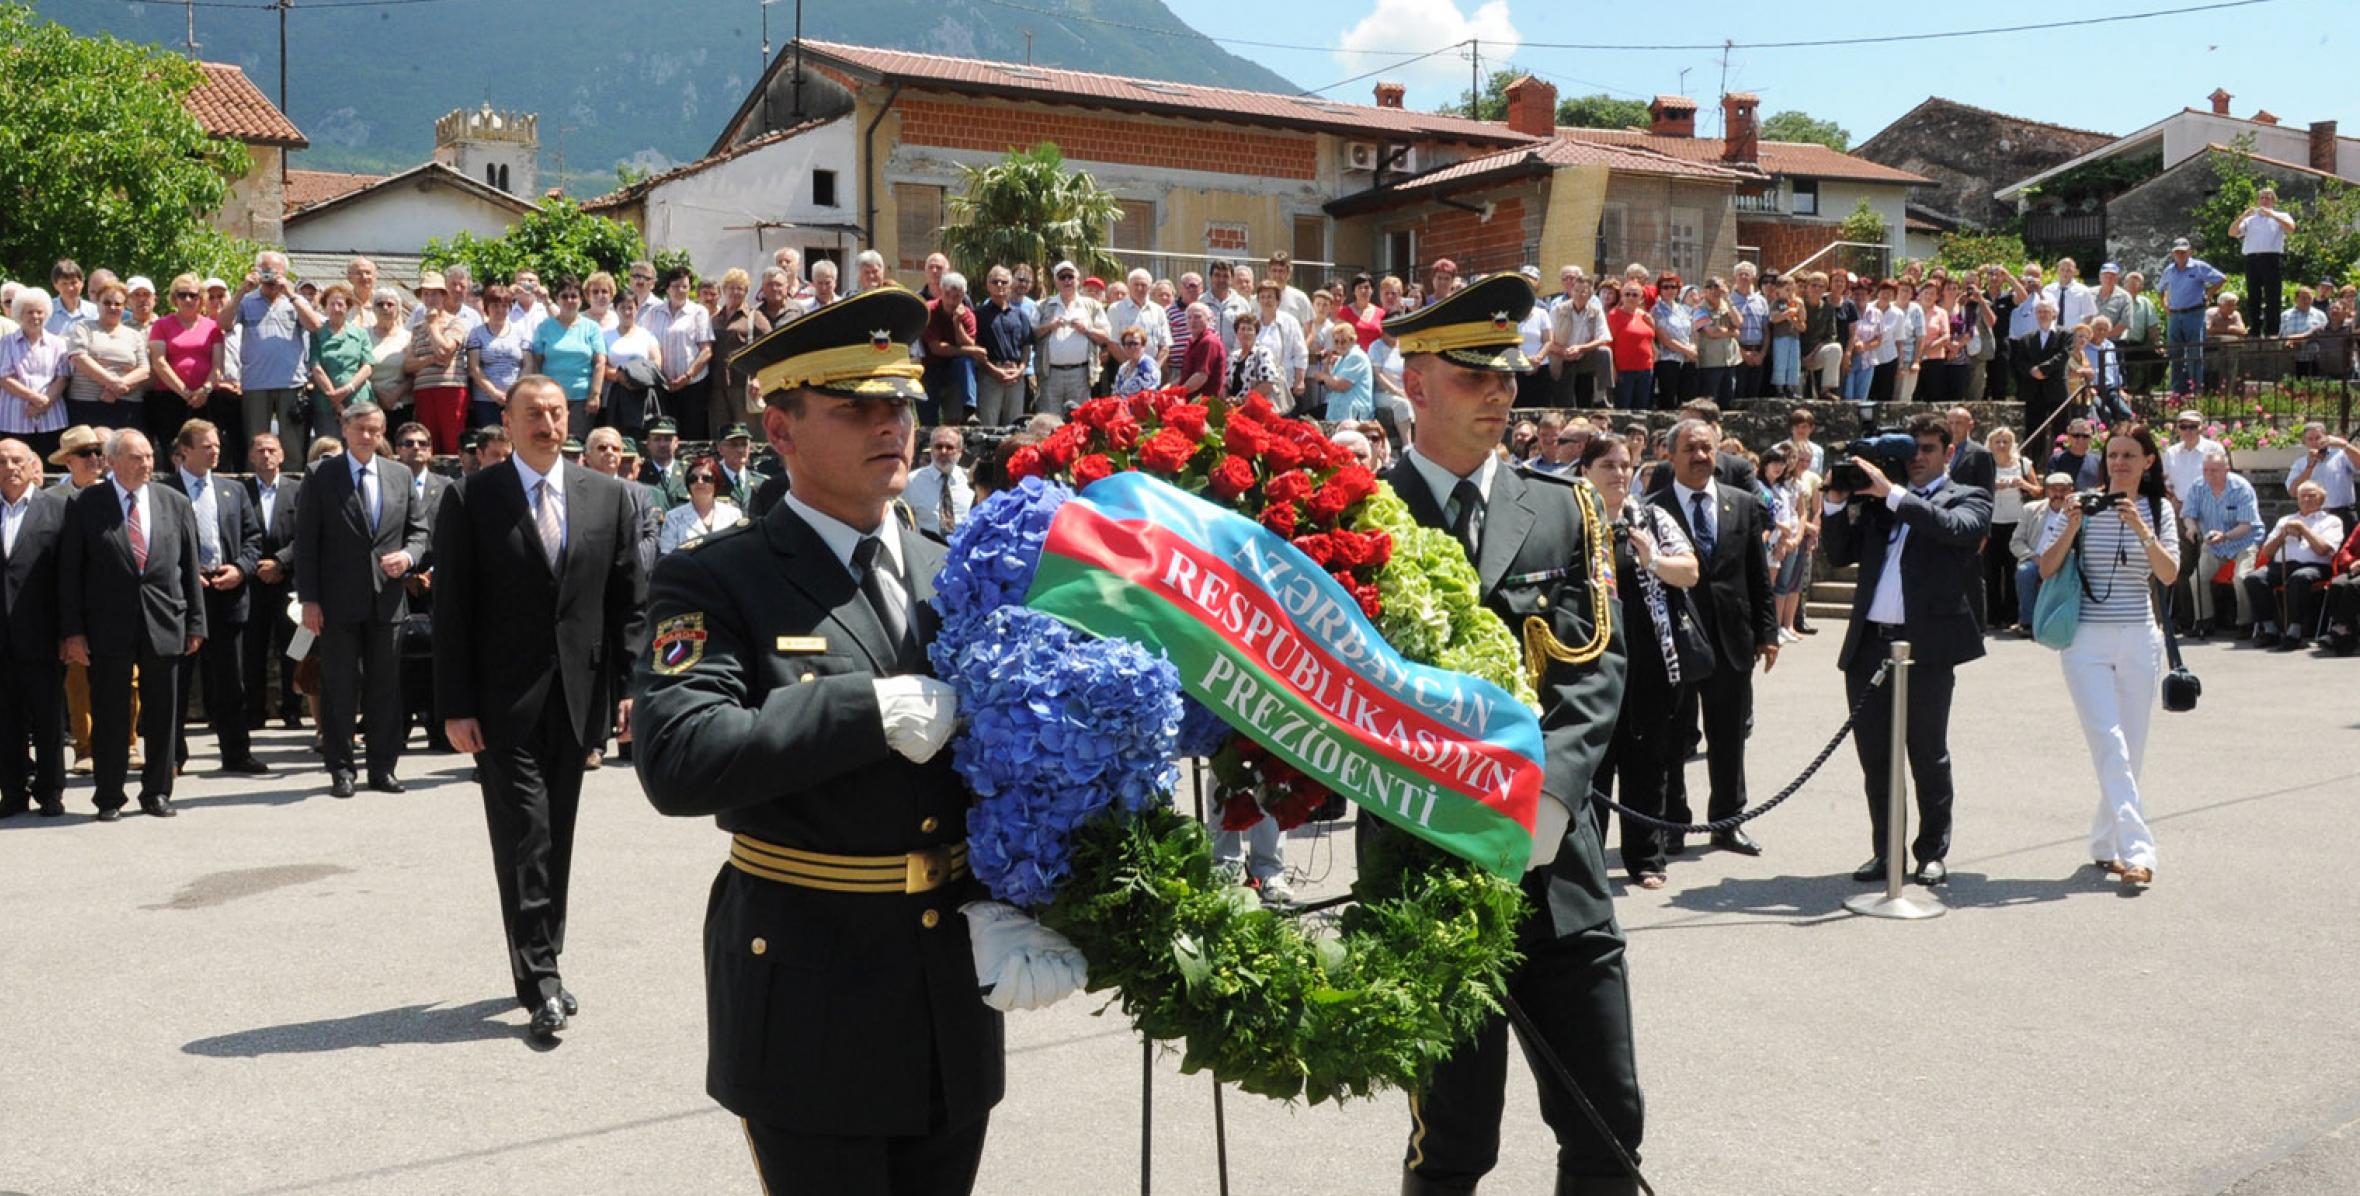 Ilham Aliyev visited a memorial of the Hero of the Soviet Union, Mehdi Huseynzadeh, in the Slovenian town of Nova Gorica